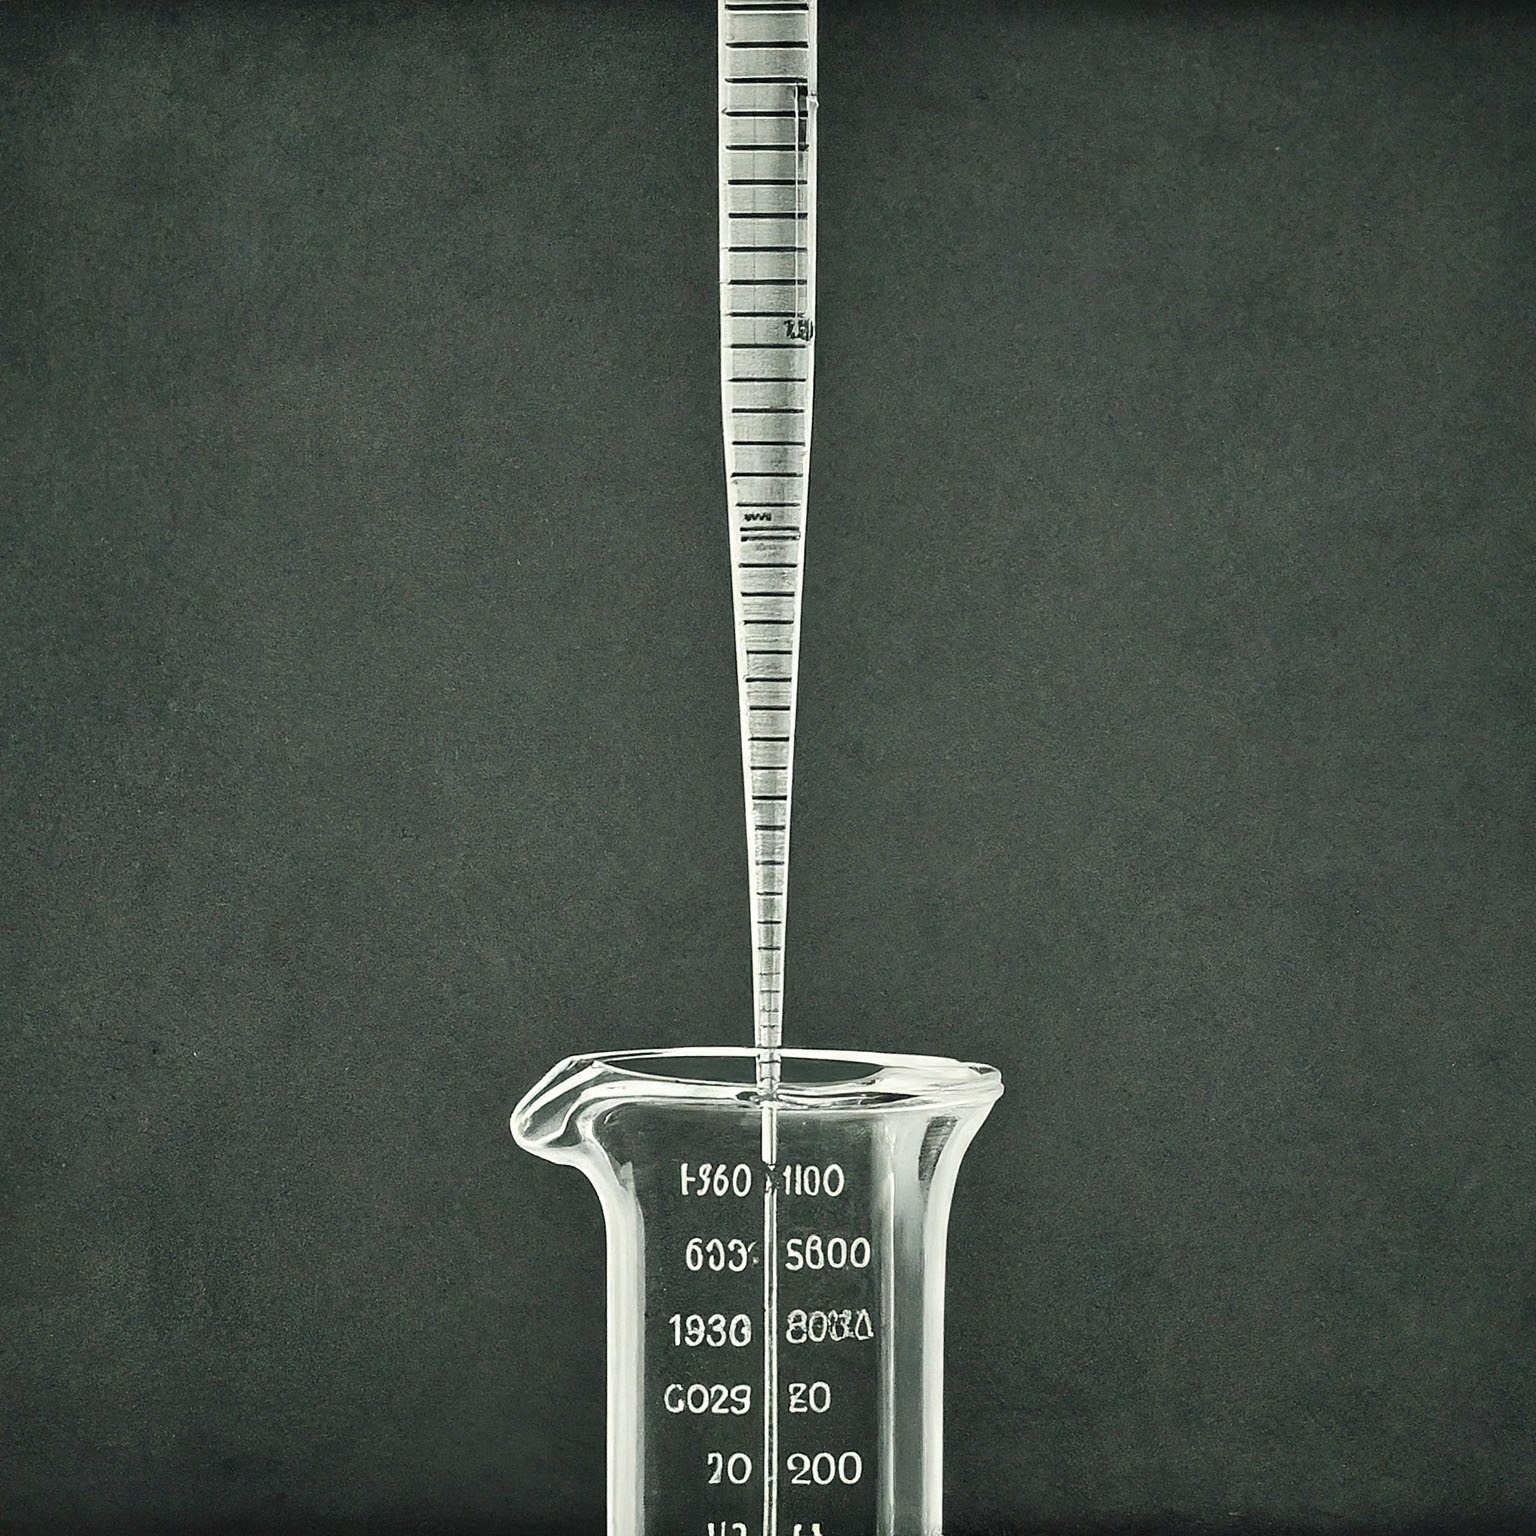 Illustration of a Mohr pipet with graduated scale